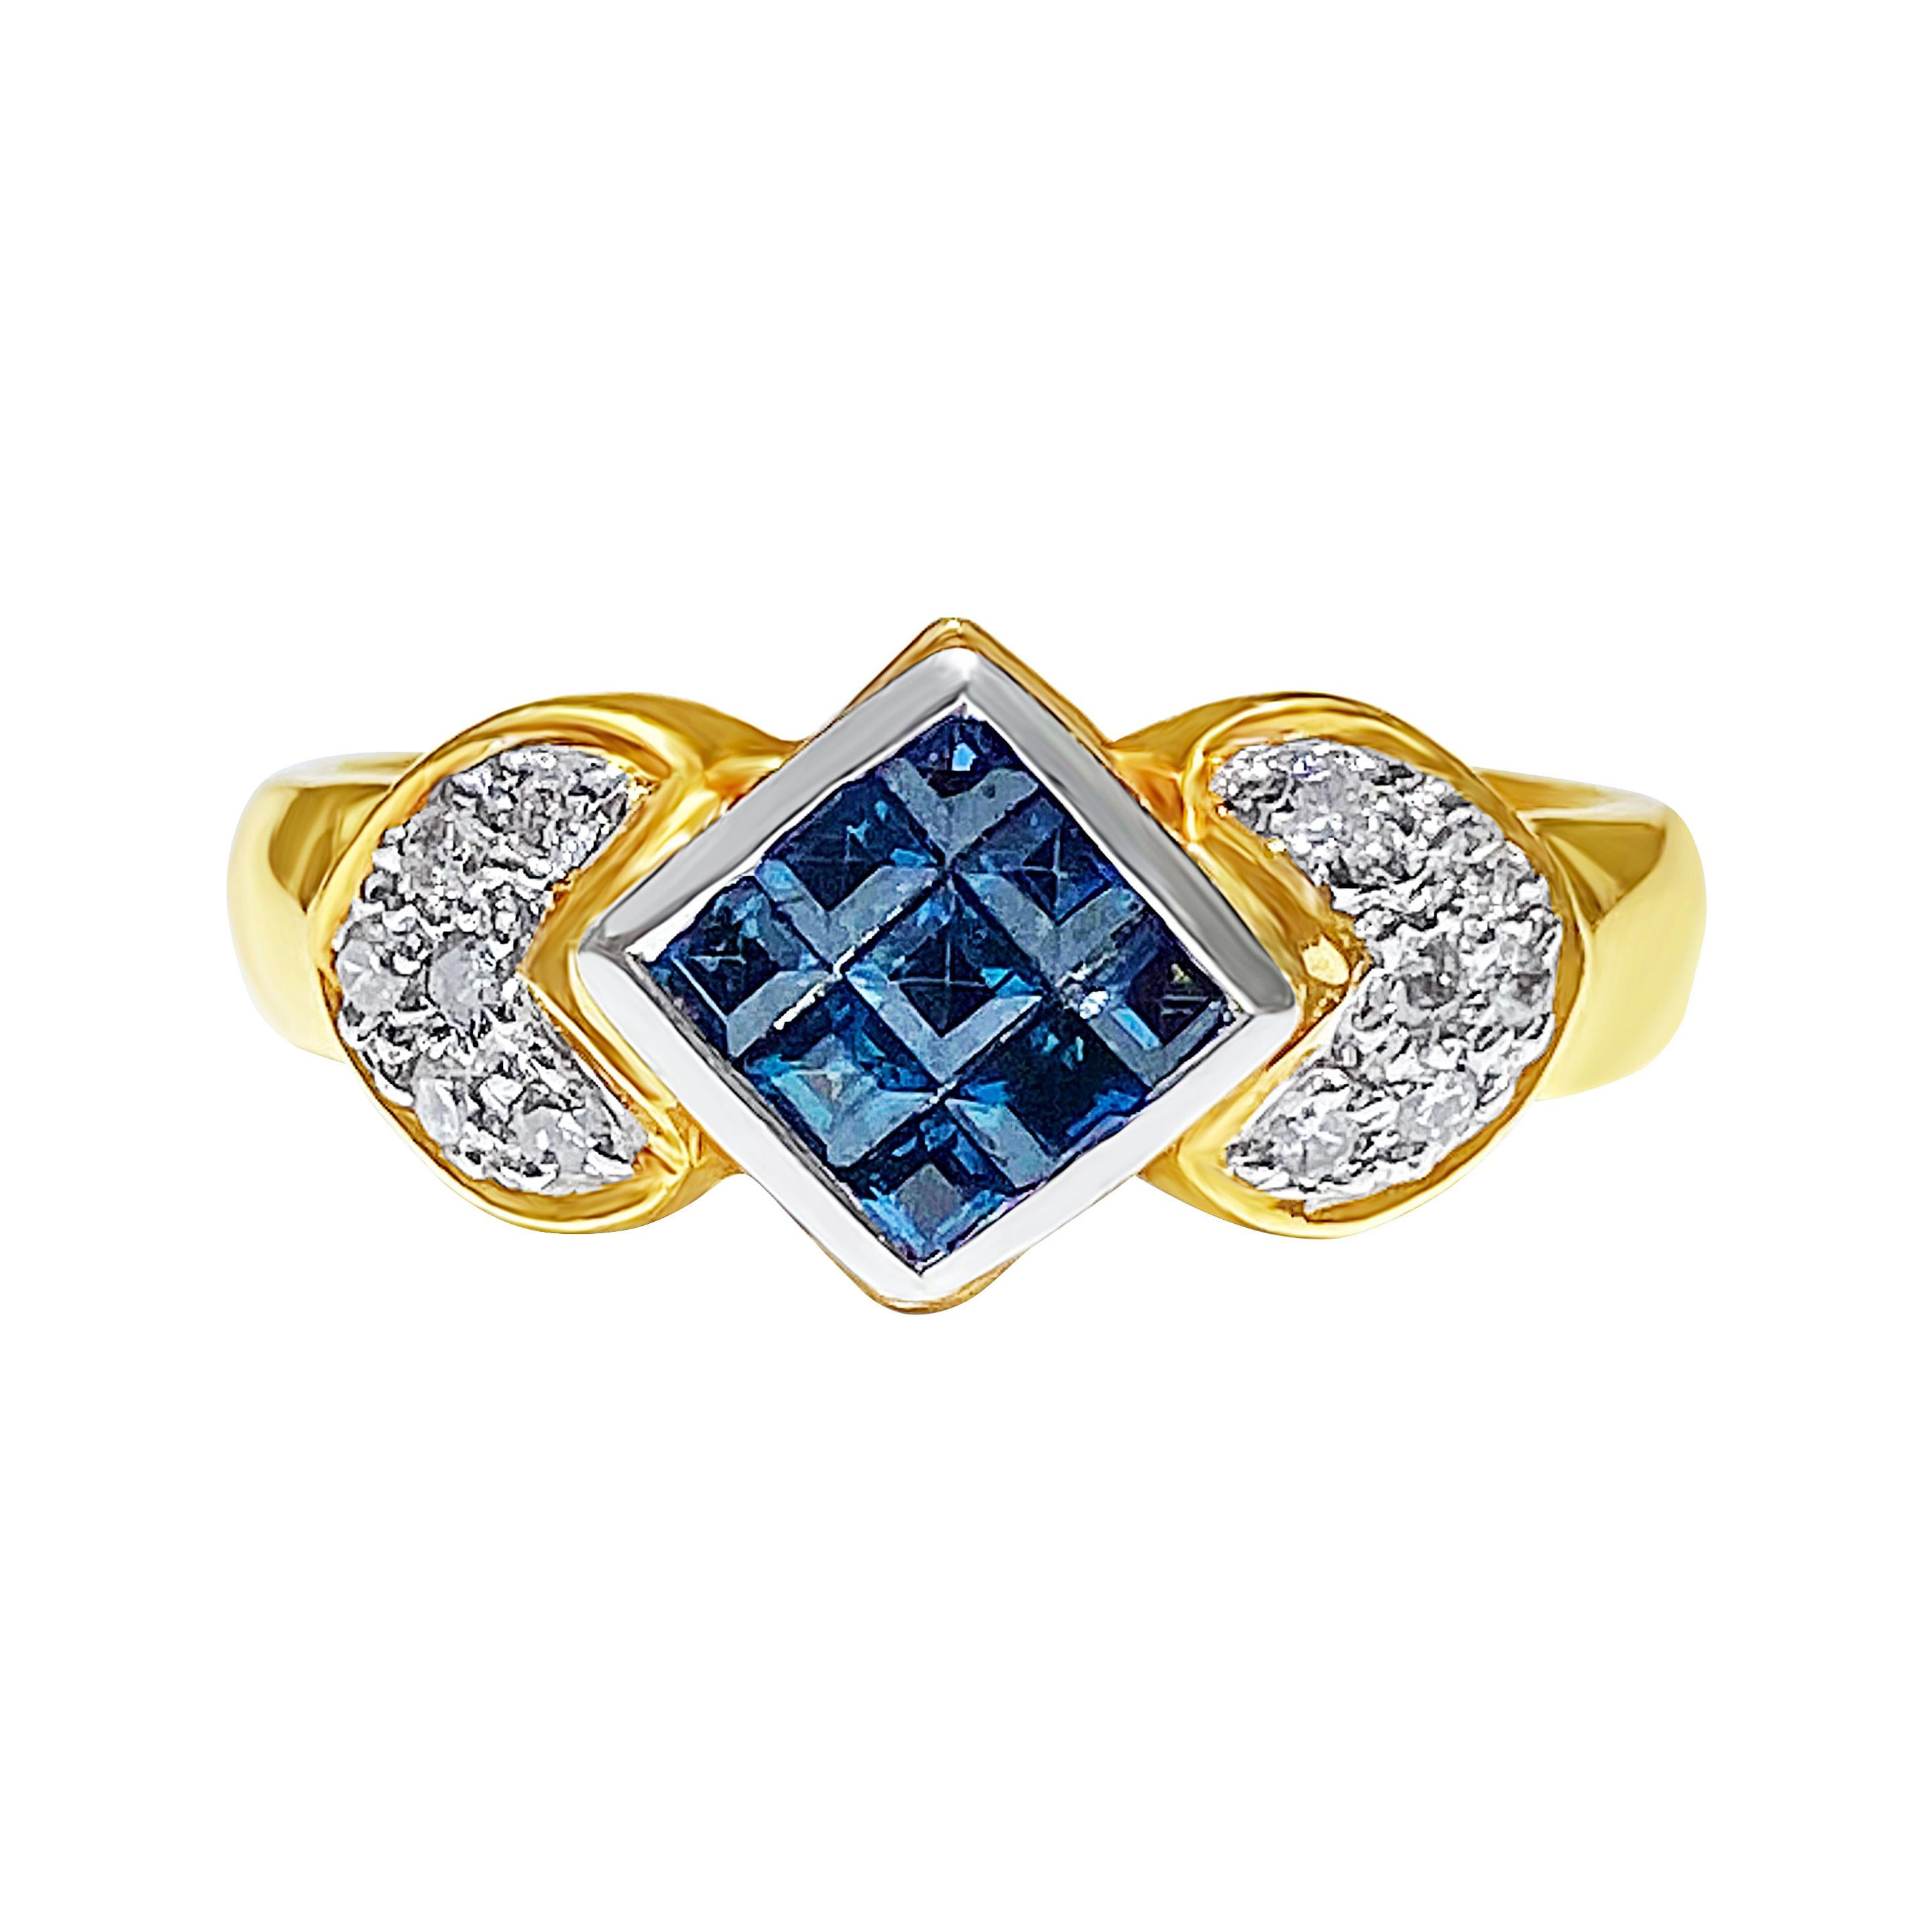 Princess-Cut Blue Sapphire and Diamond Ring in 14k Yellow Gold